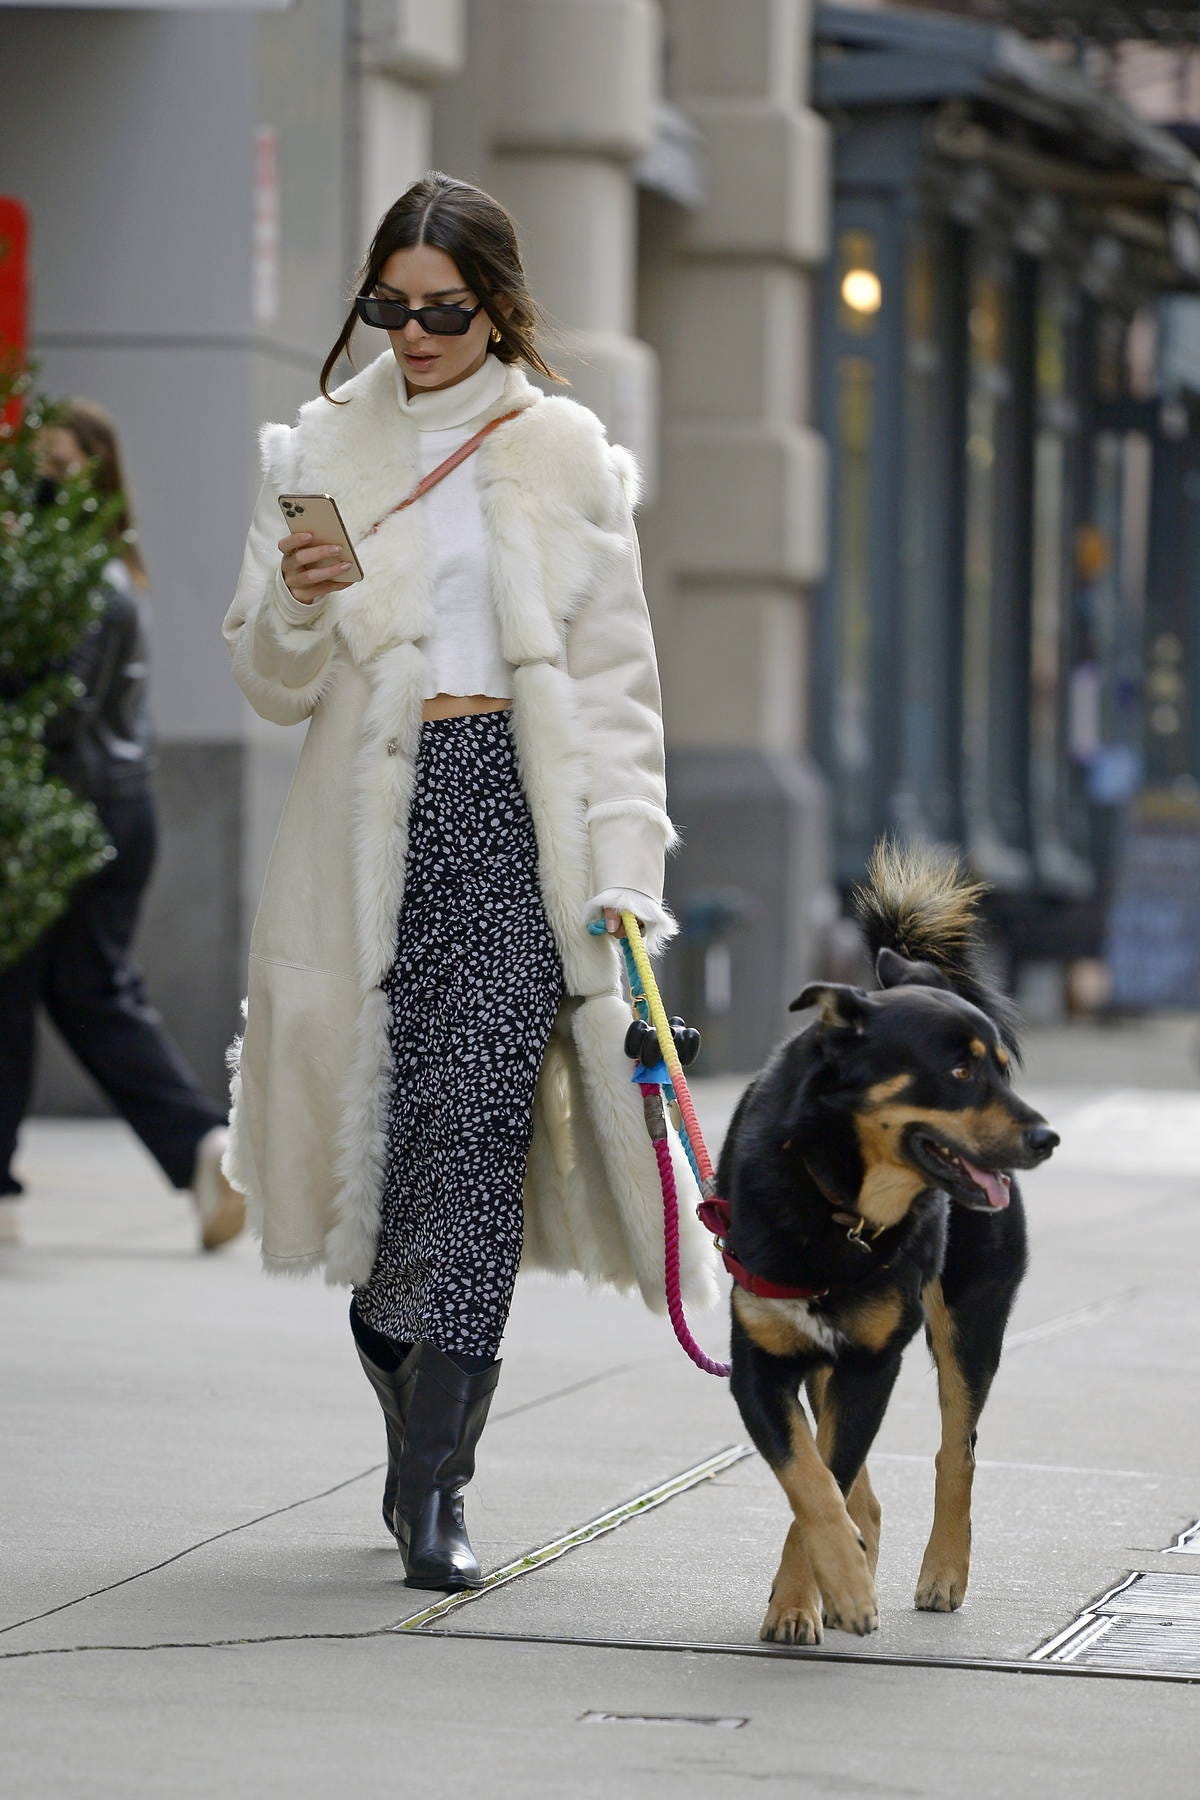 emily ratajkowski looks chic a white fur coat, white top, and patterned  skirt while walking her dog in tribeca in new york city-171121_5